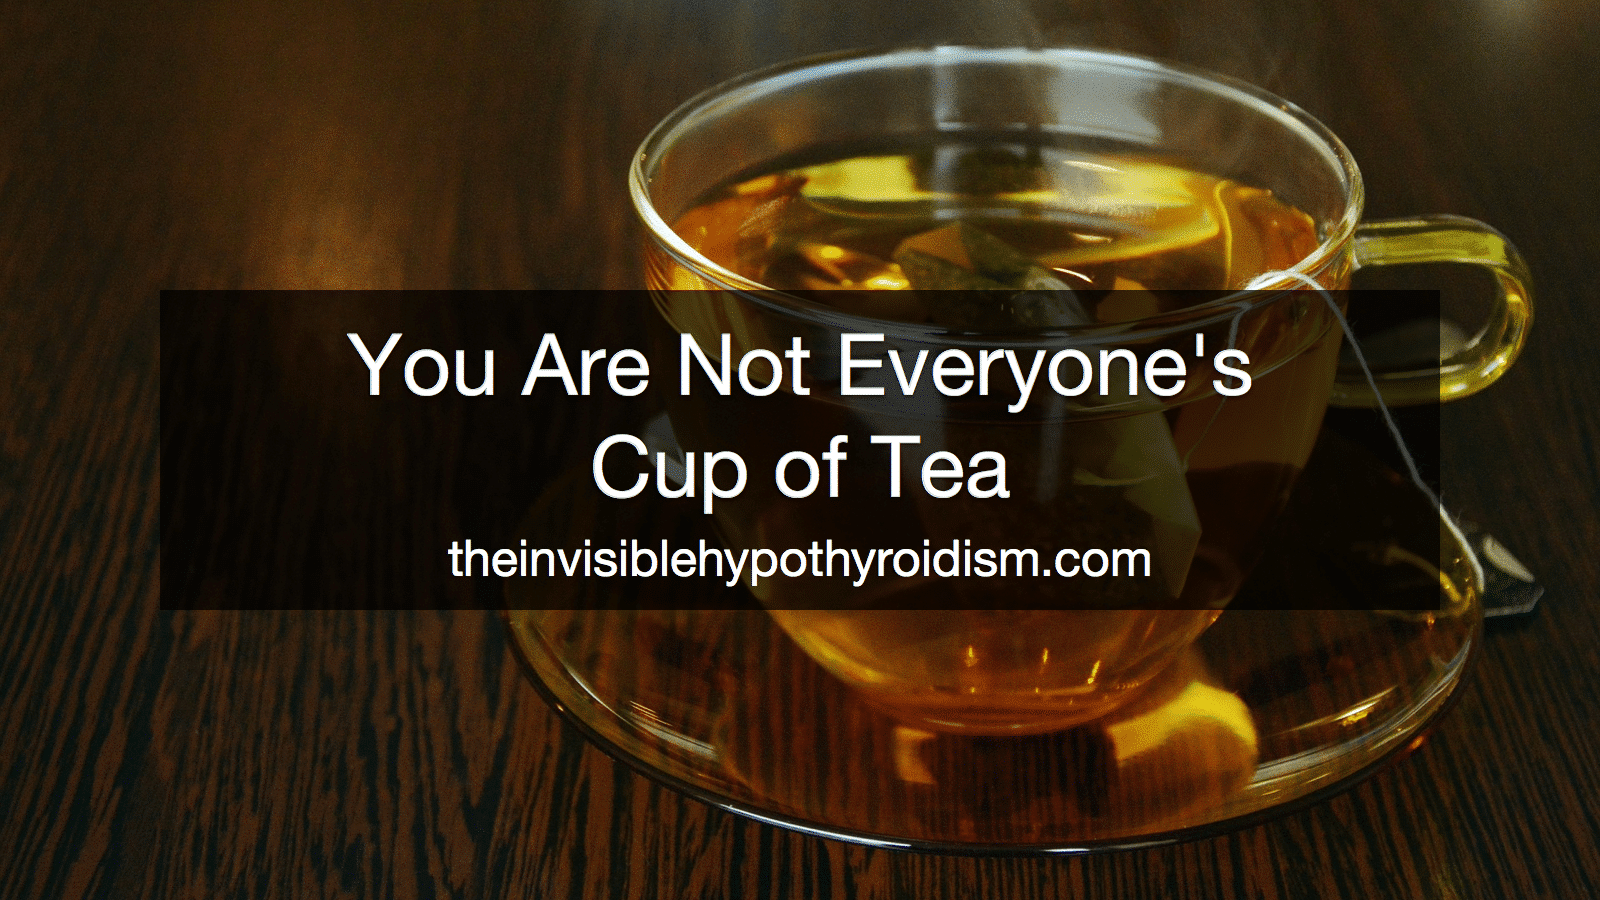 You Are Not Everyone's Cup of Tea